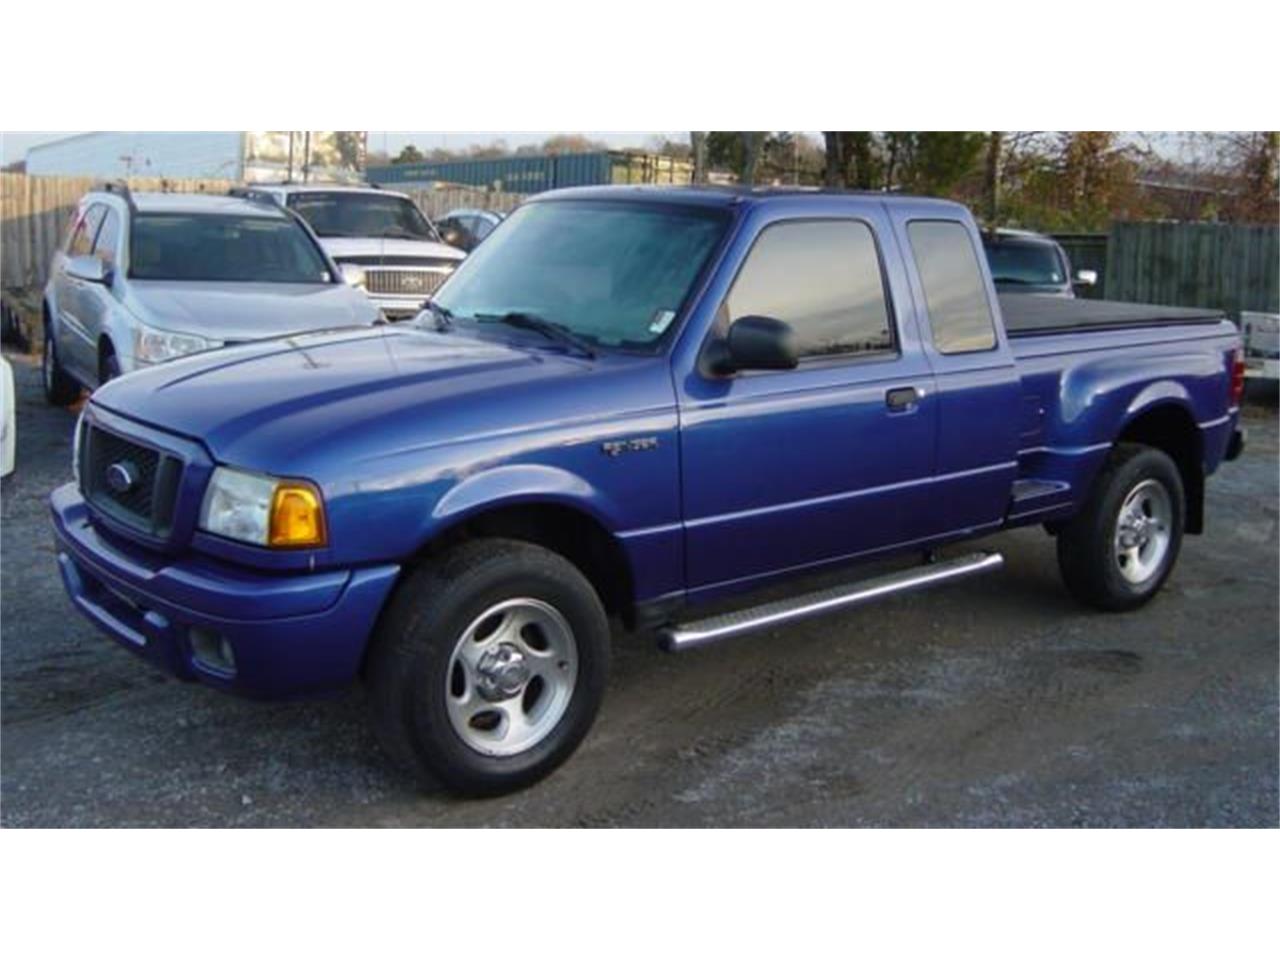 2004 Ford RANGER EXTENDED CAB for Sale | ClassicCars.com | CC-932894